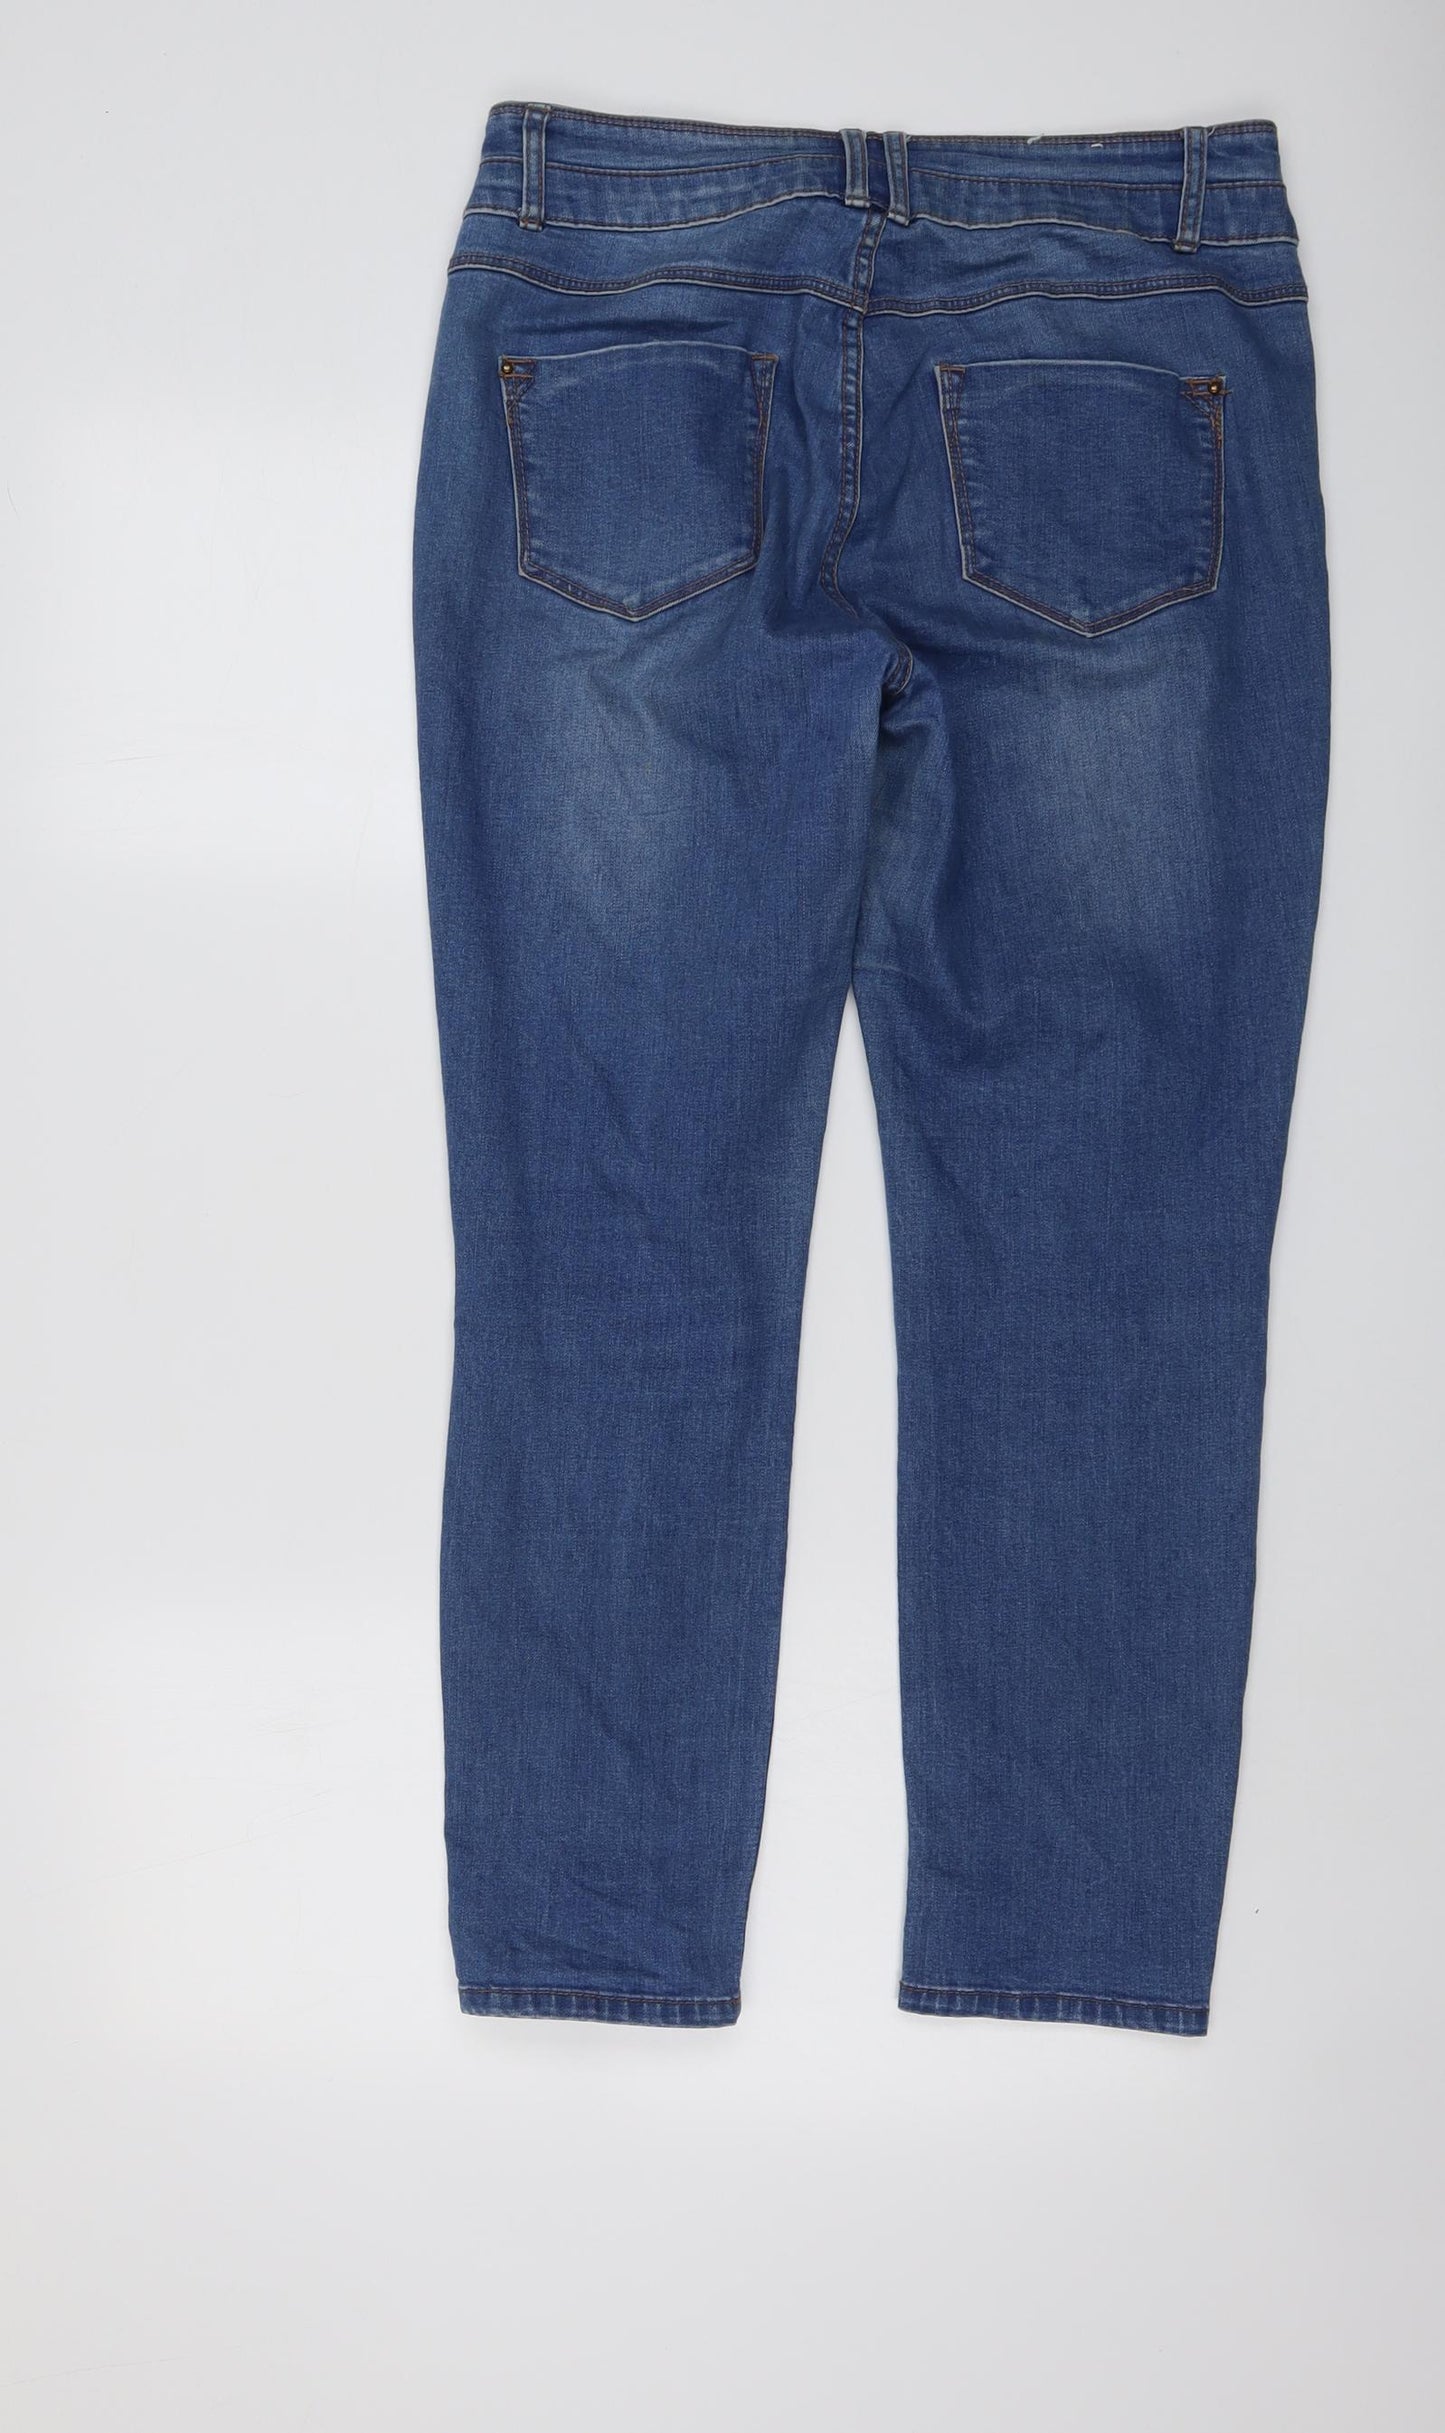 New Look Womens Blue Cotton Skinny Jeans Size 12 L27 in Regular Button